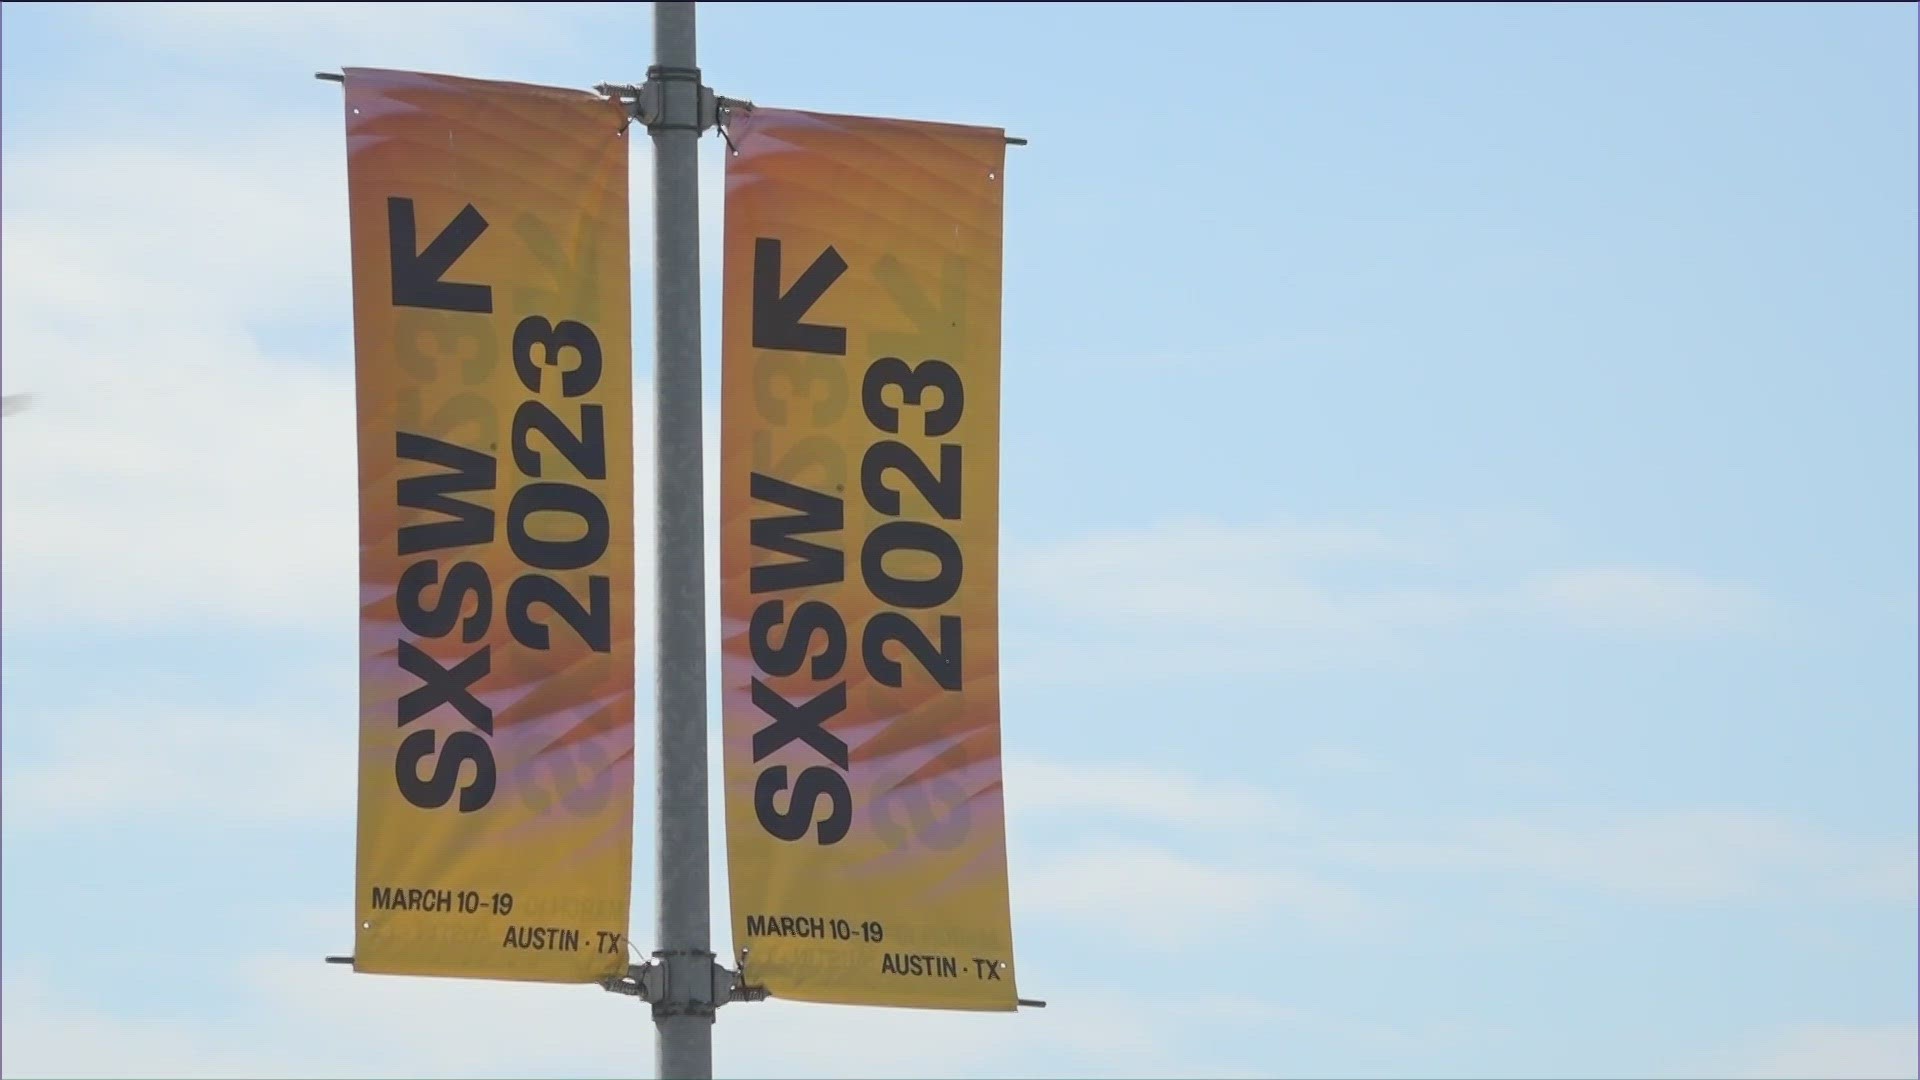 The Luck Reunion has been postponed to Friday, and the SXSW Community Concerts are moving indoors on Thursday. KVUE's Melia Masumoto has the latest.